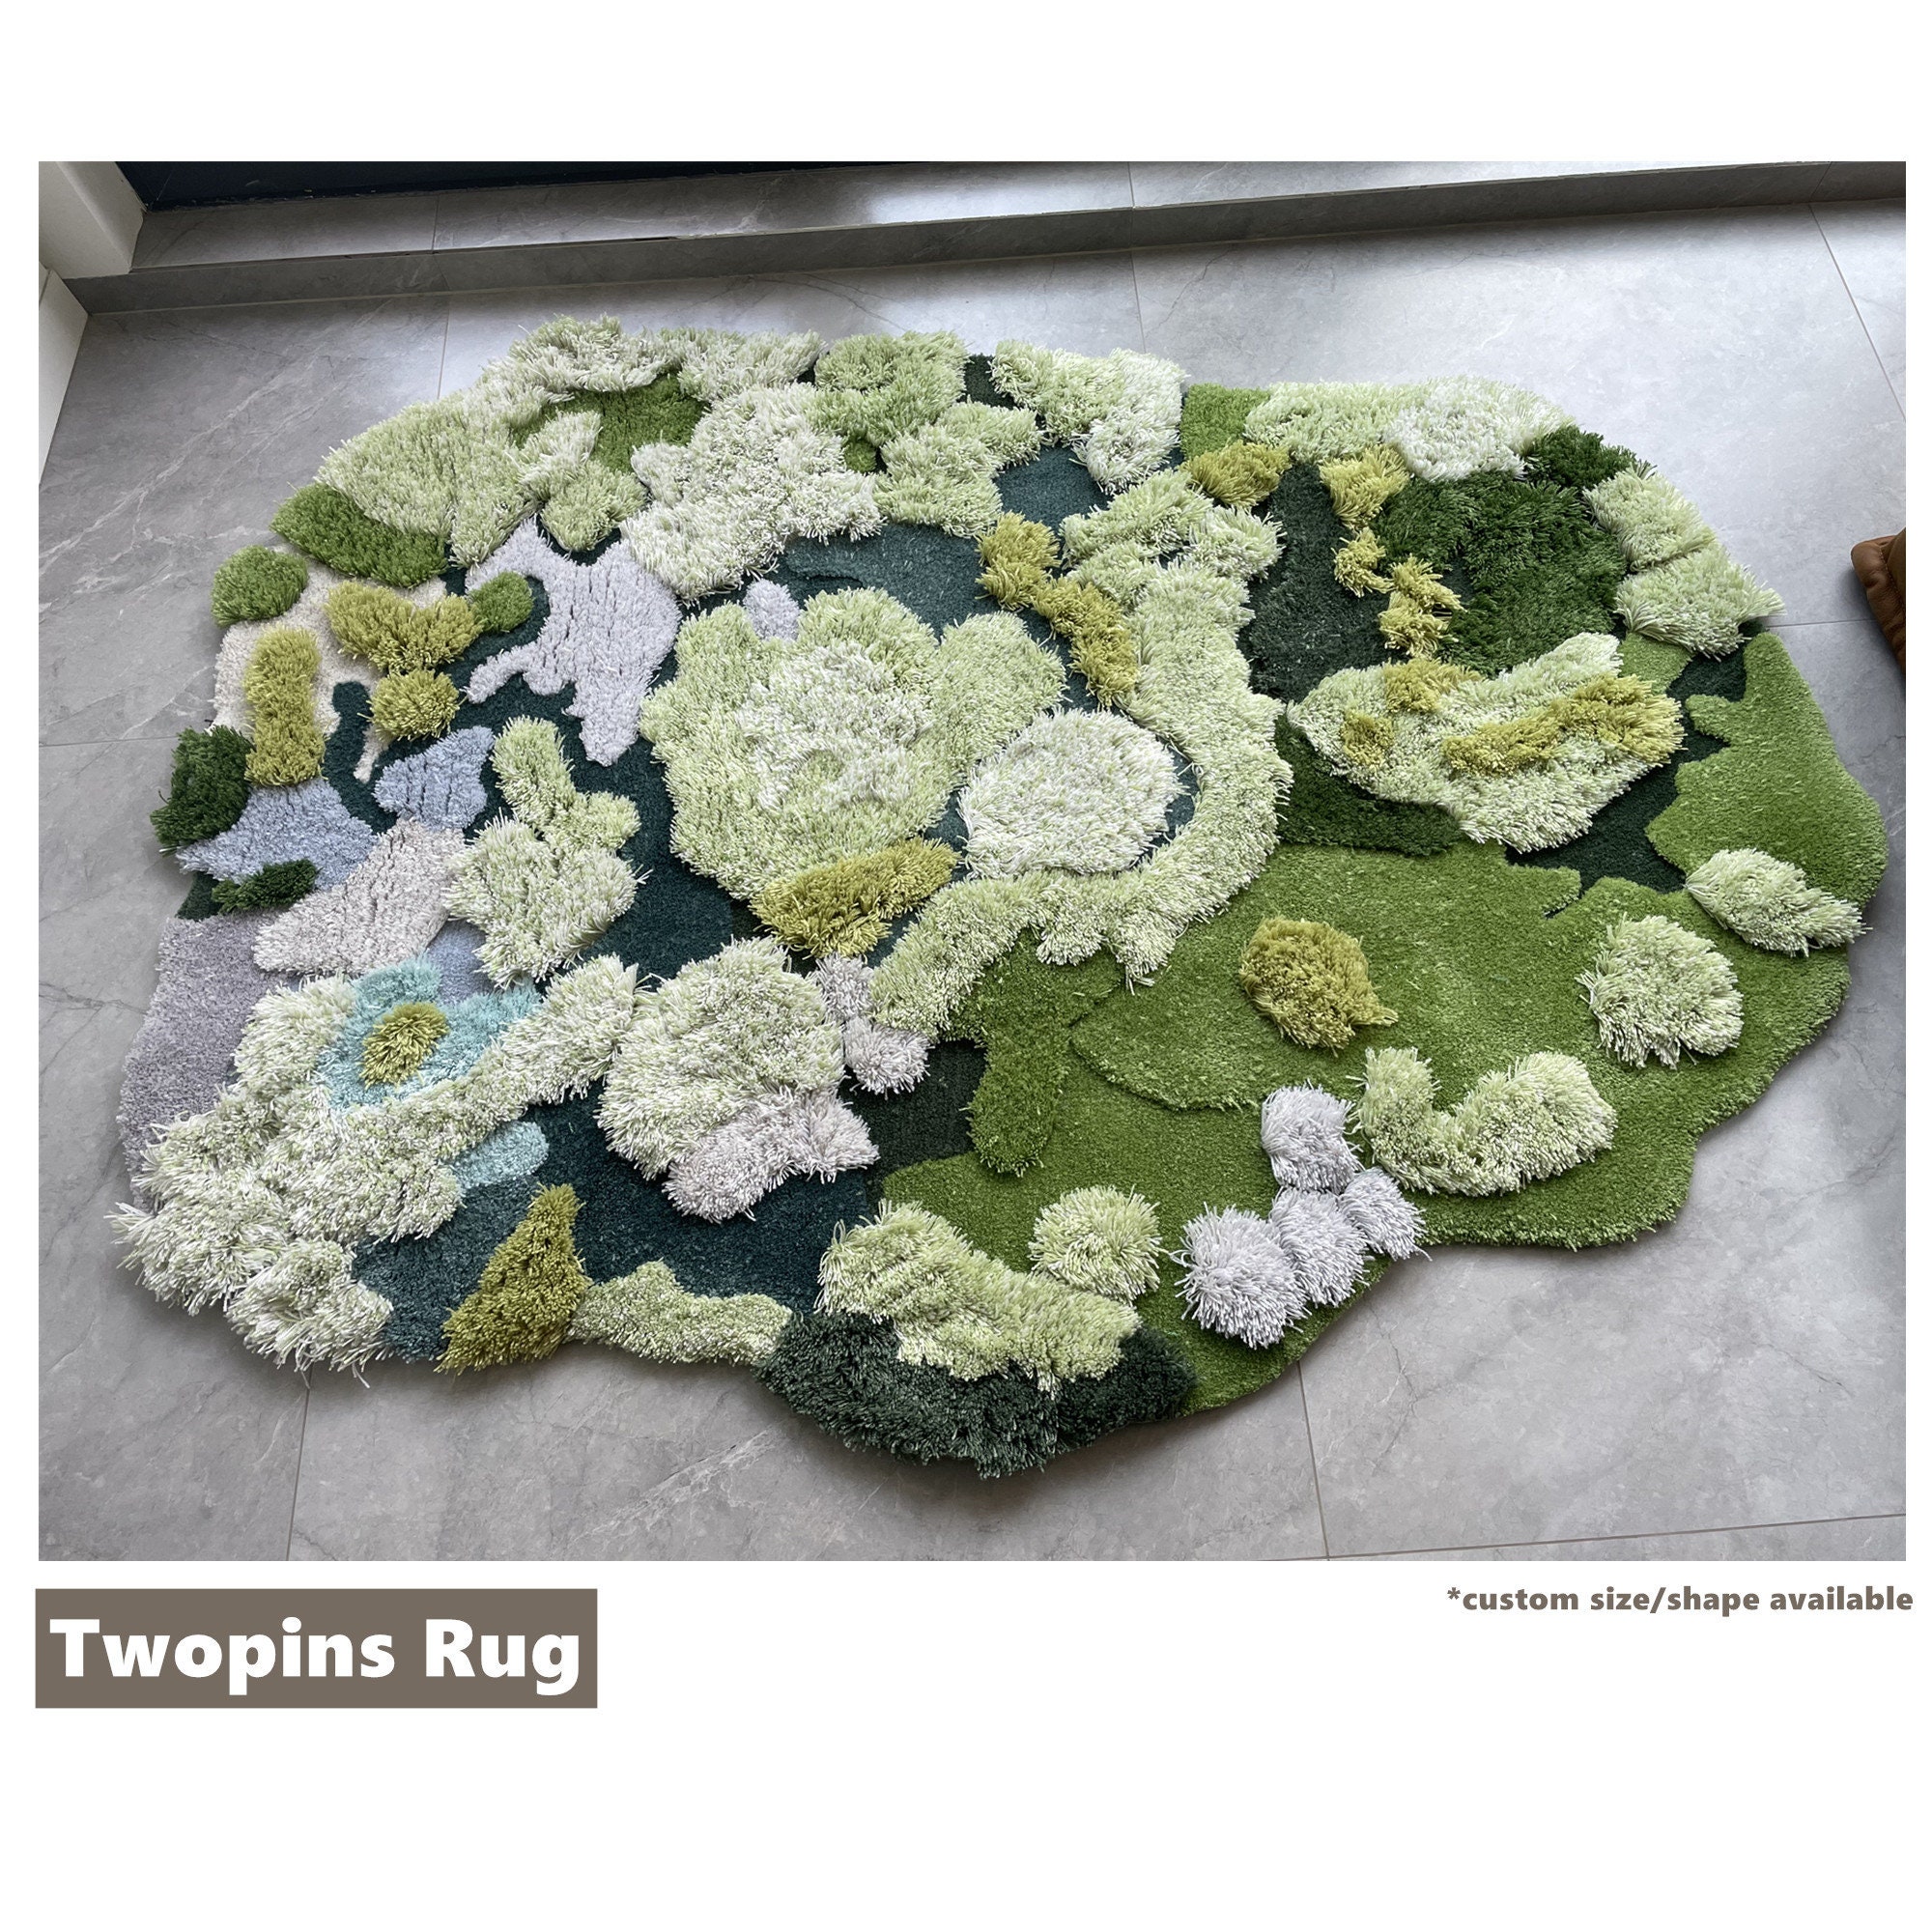 3D Tufted Area Rugs Carpet/tundra/forest/moss Rug/art/kids Play